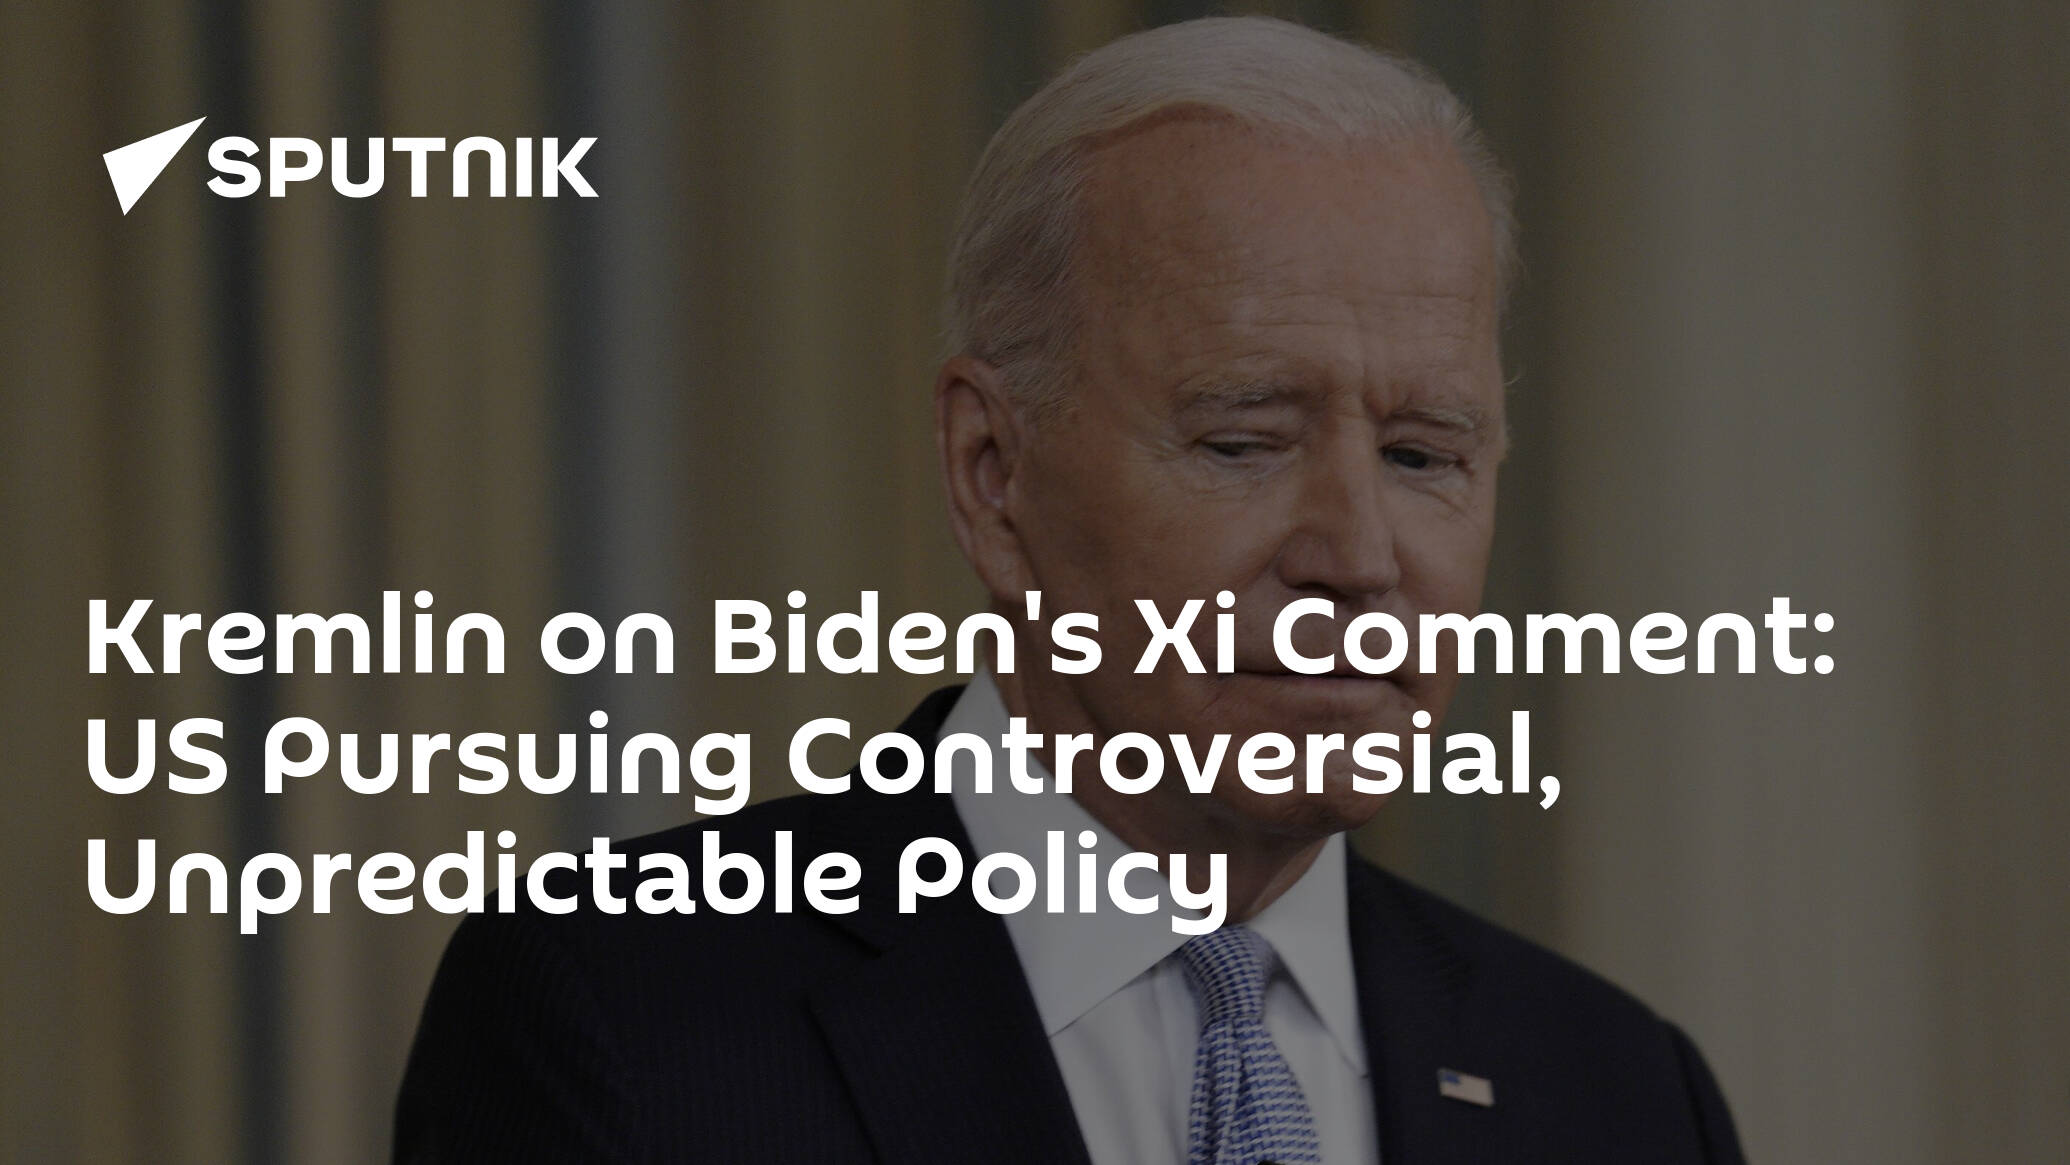 Kremlin on Biden's Xi Comment: US Pursuing Controversial, Unpredictable Policy